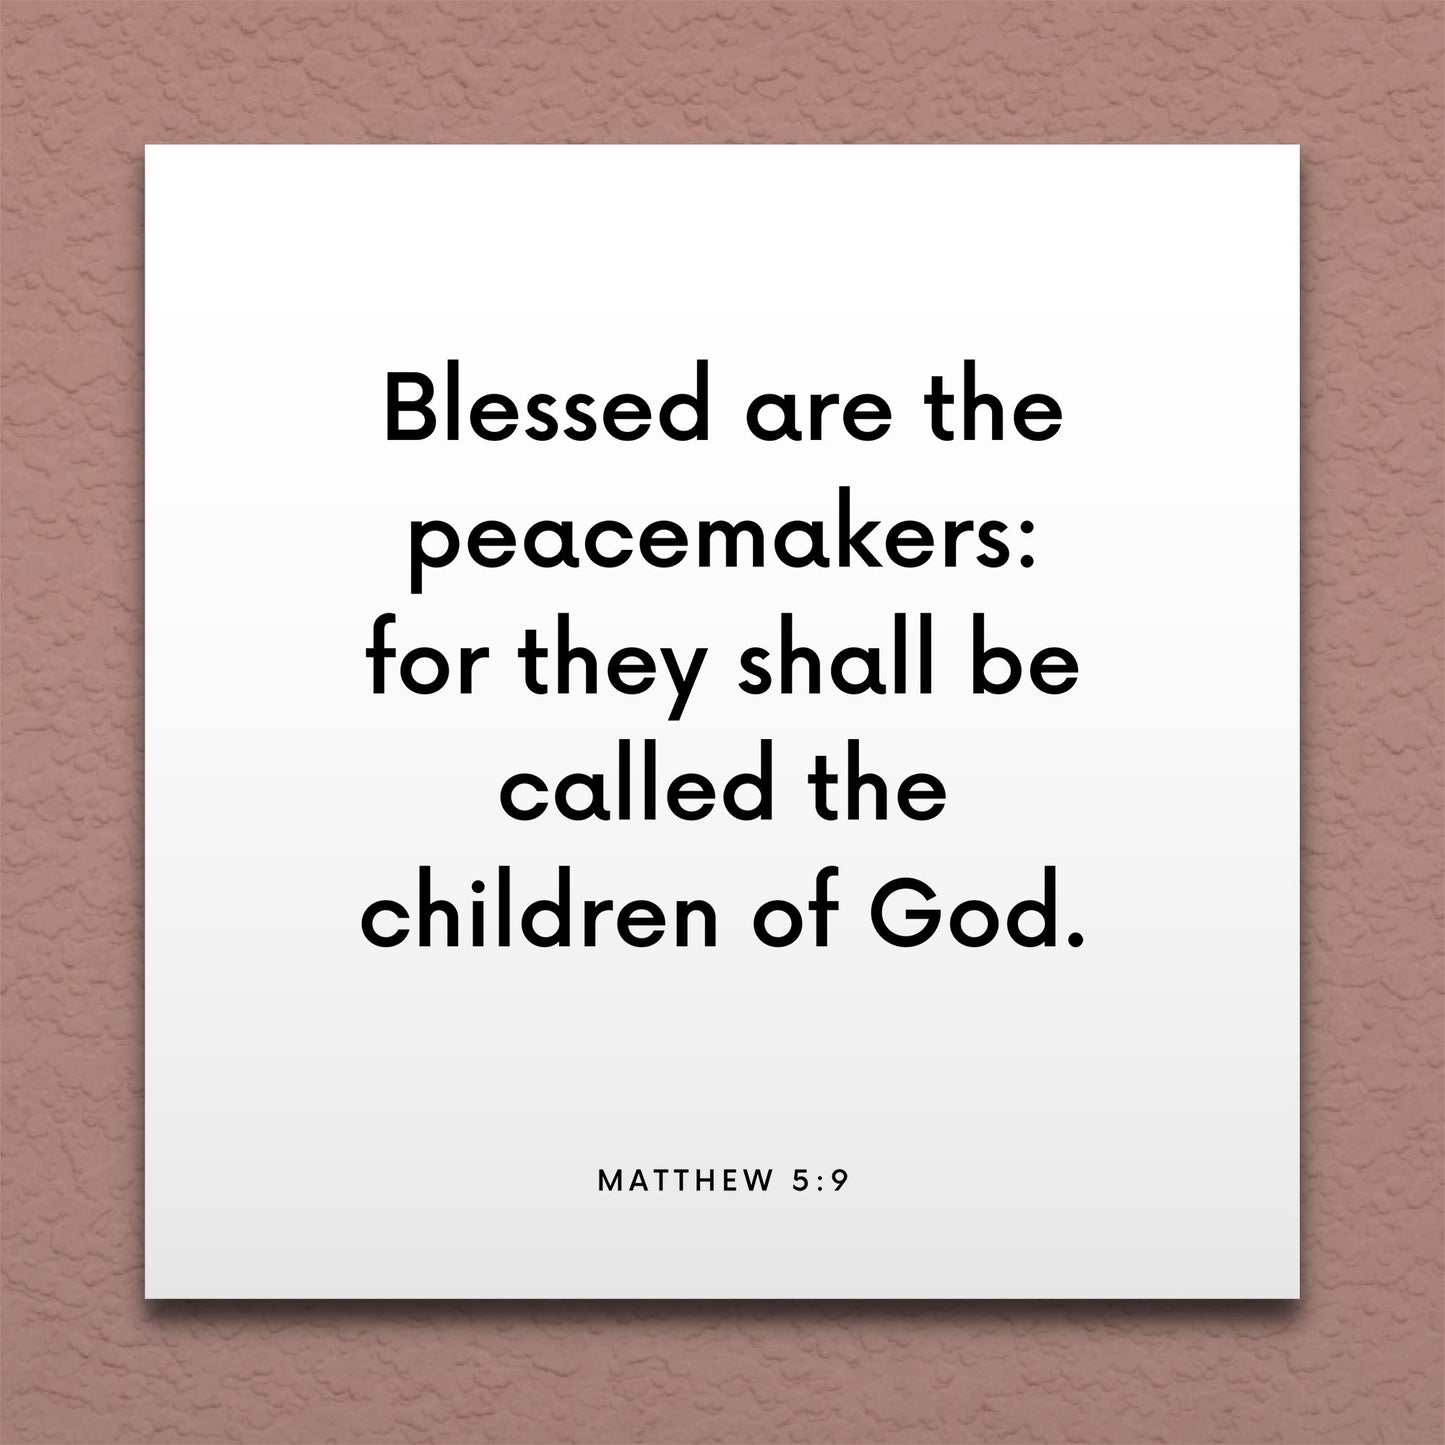 Wall-mounted scripture tile for Matthew 5:9 - "Blessed are the peacemakers"